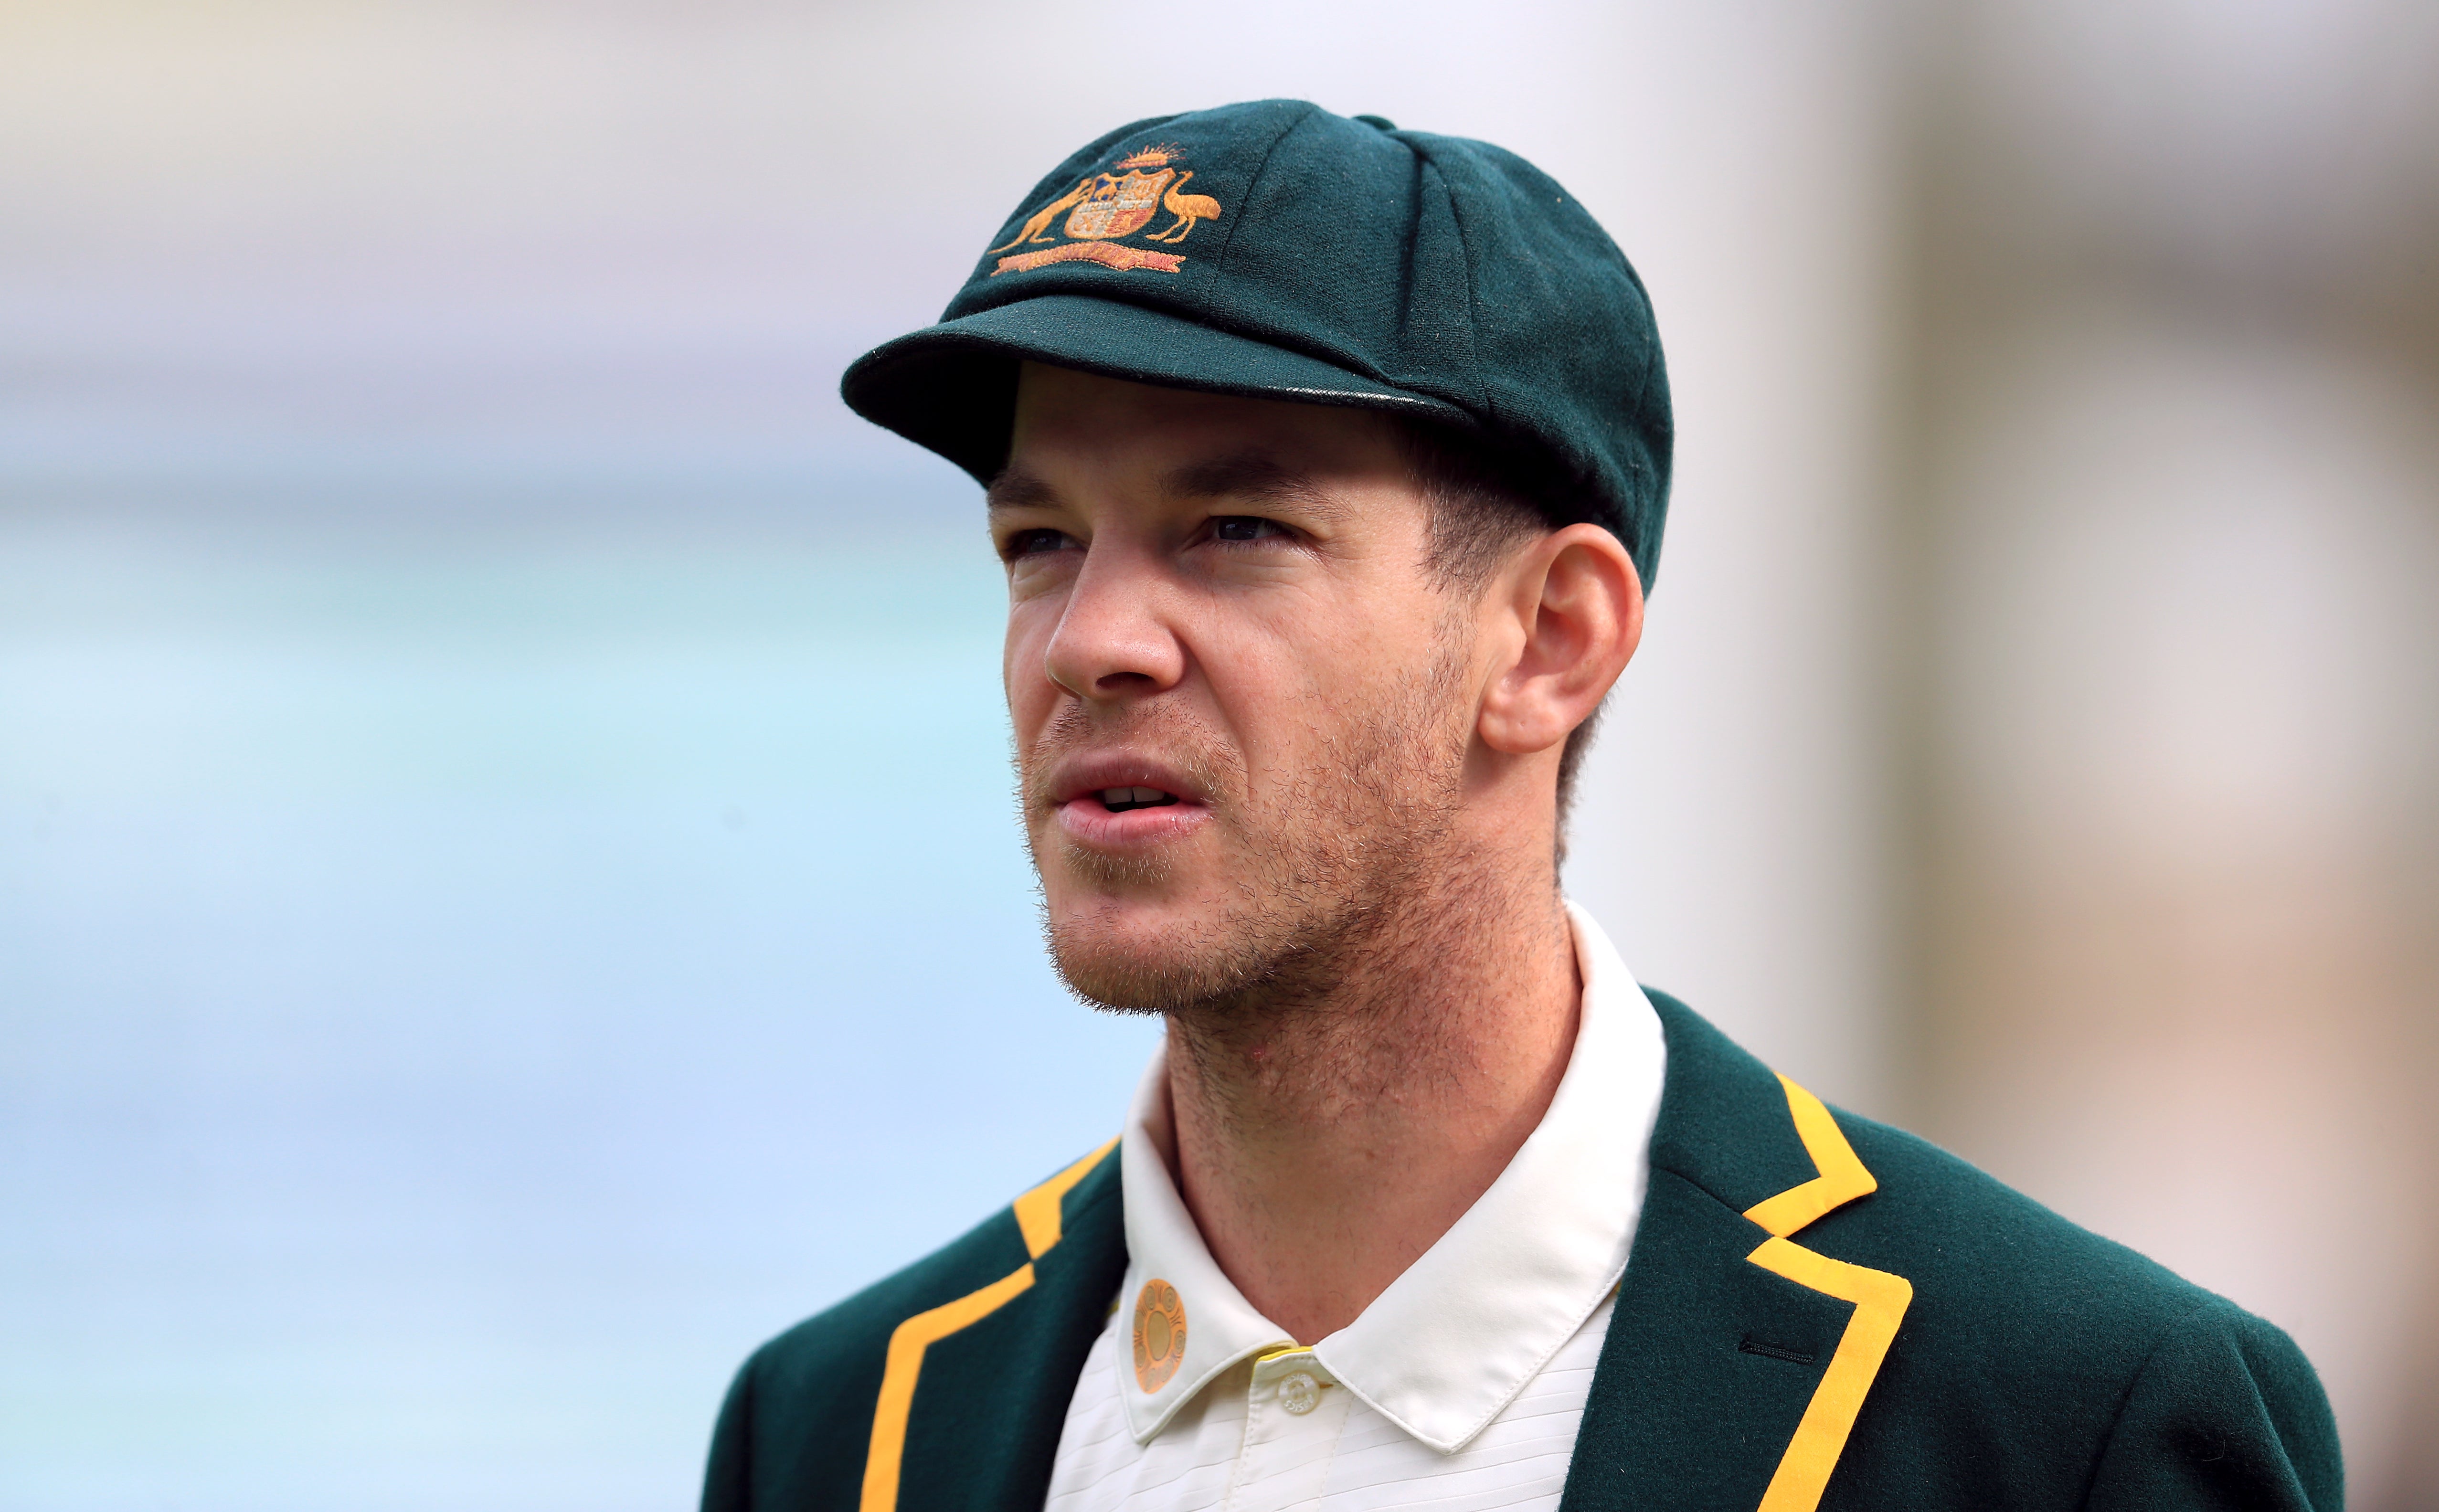 Cricket Australia (CA) has admitted making the wrong call by not disclosing an investigation into Tim Paine’s inappropriate behaviour in 2018, with the move leading to his resignation as the country’s Test captain (Mike Egerton/PA)